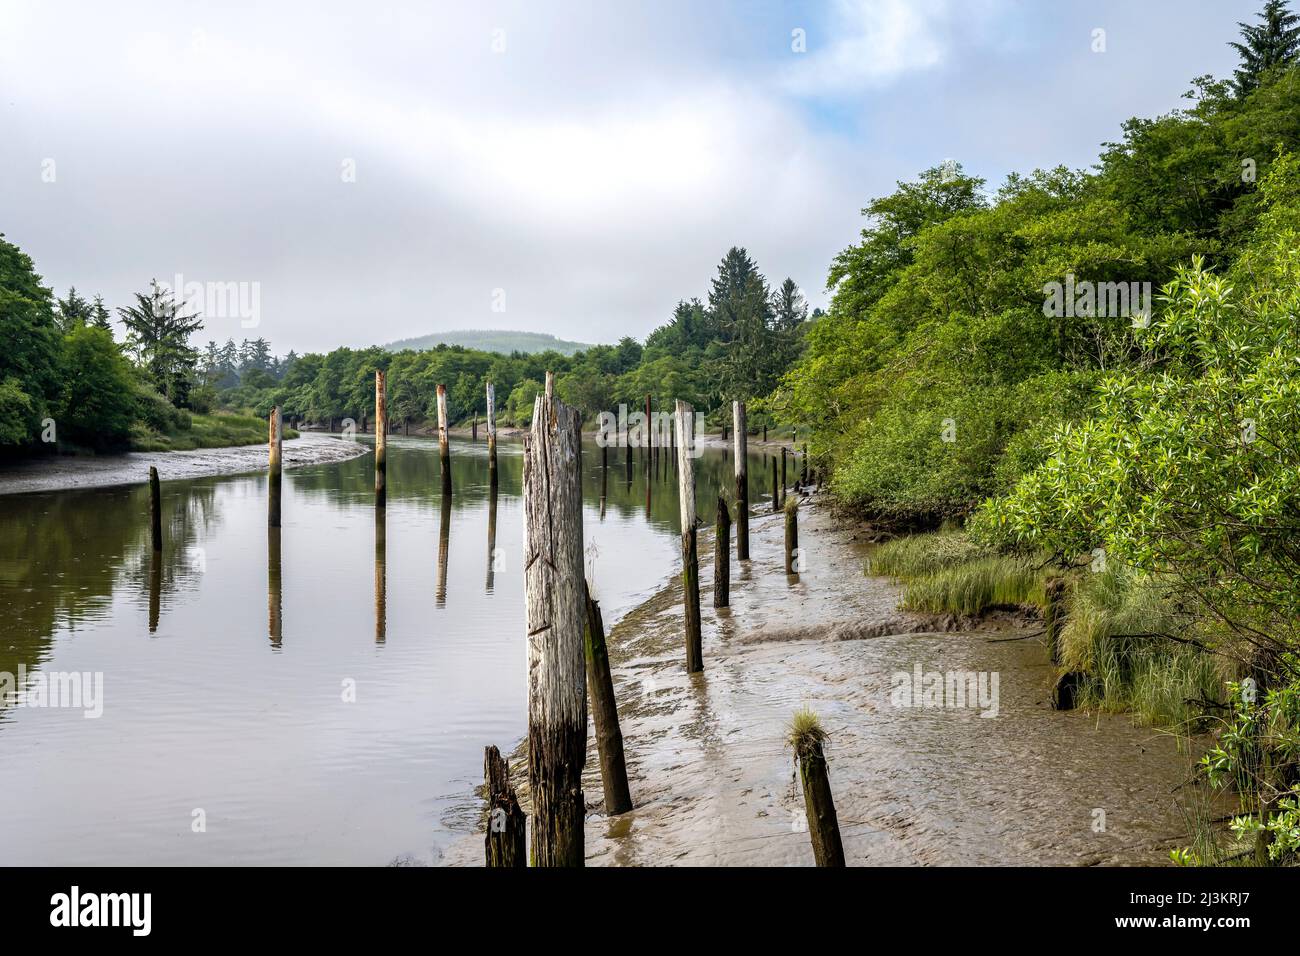 Low tide reveals the Netul River riverbanks at Lewis and Clark National Historical Park in Oregon; Astoria, Oregon, United States of America Stock Photo